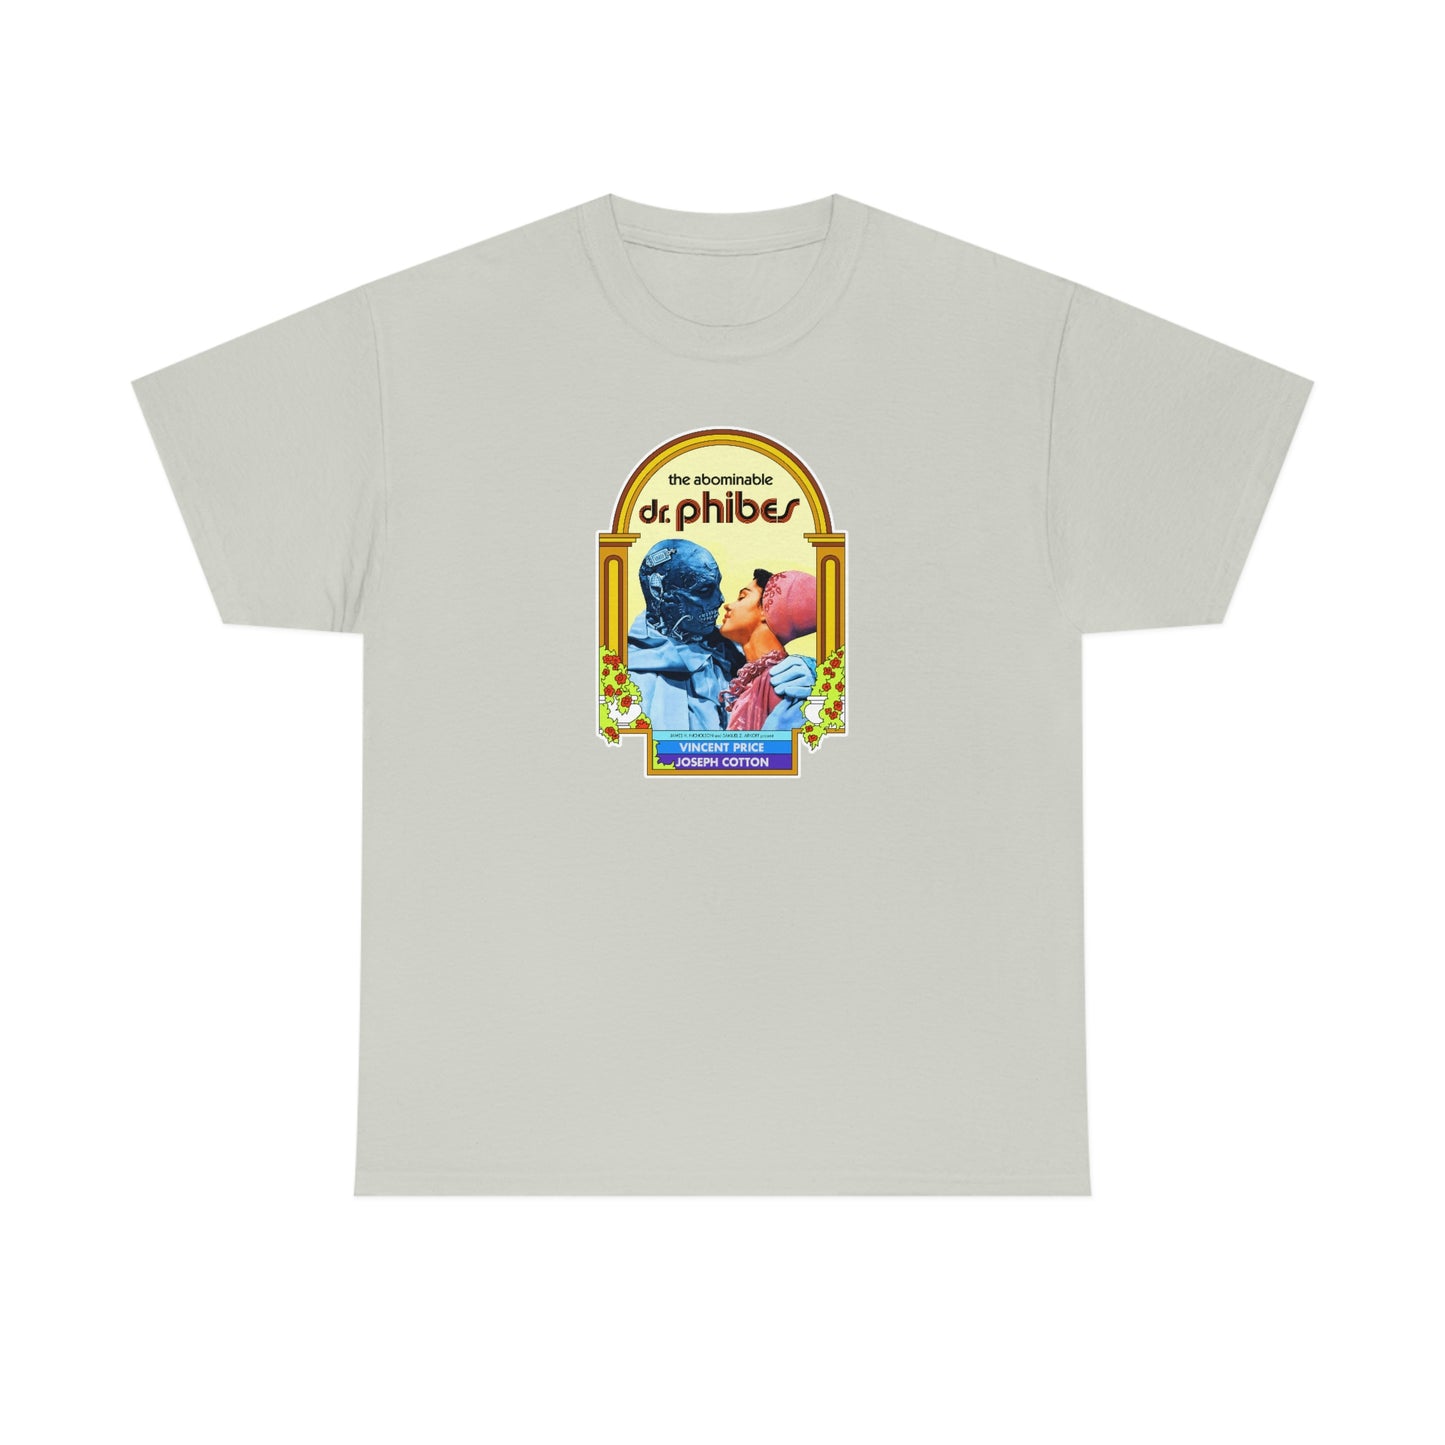 The Abominable Dr. Phibes T-Shirt